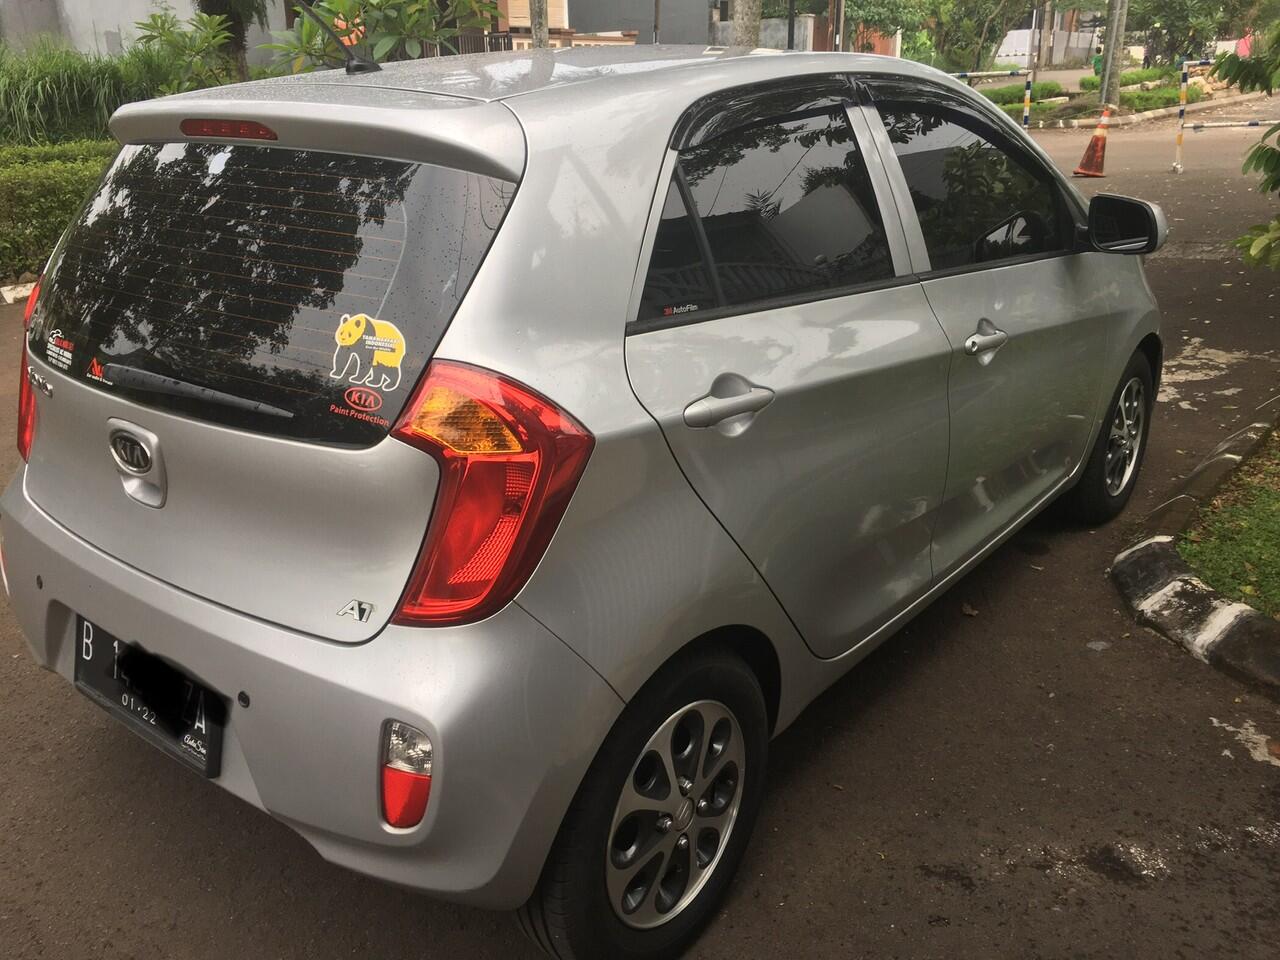 PICANTO Kaskus Community ALL in smALL Part 1 Page 